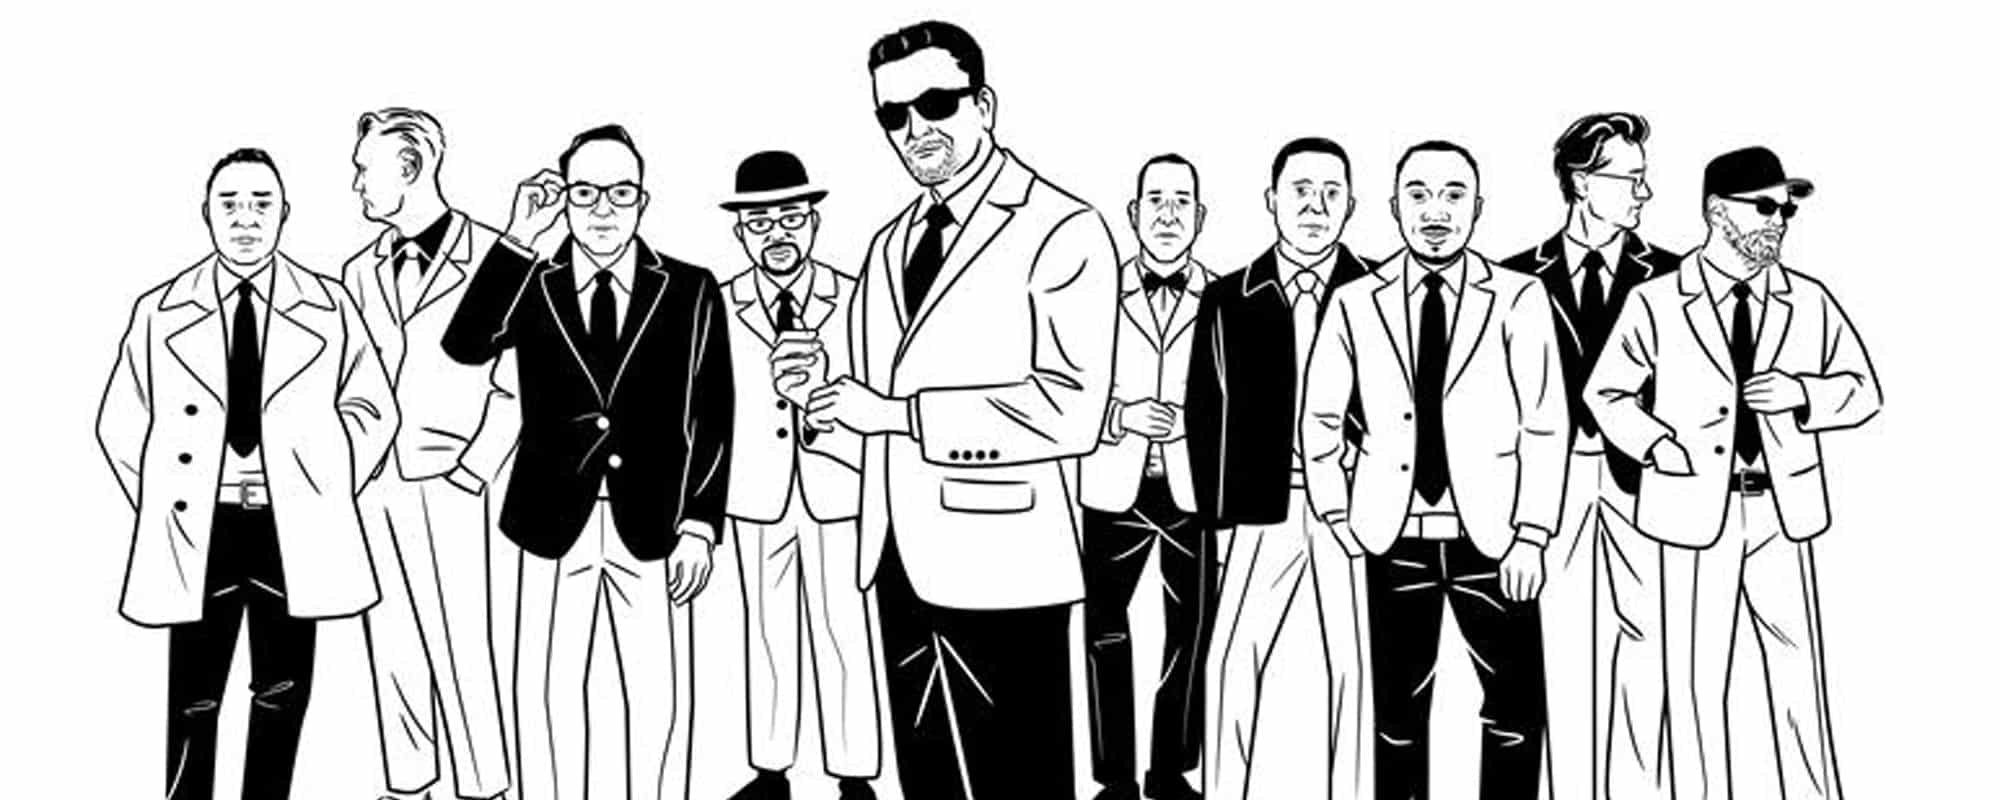 The Mighty Mighty Bosstones Announce Breakup